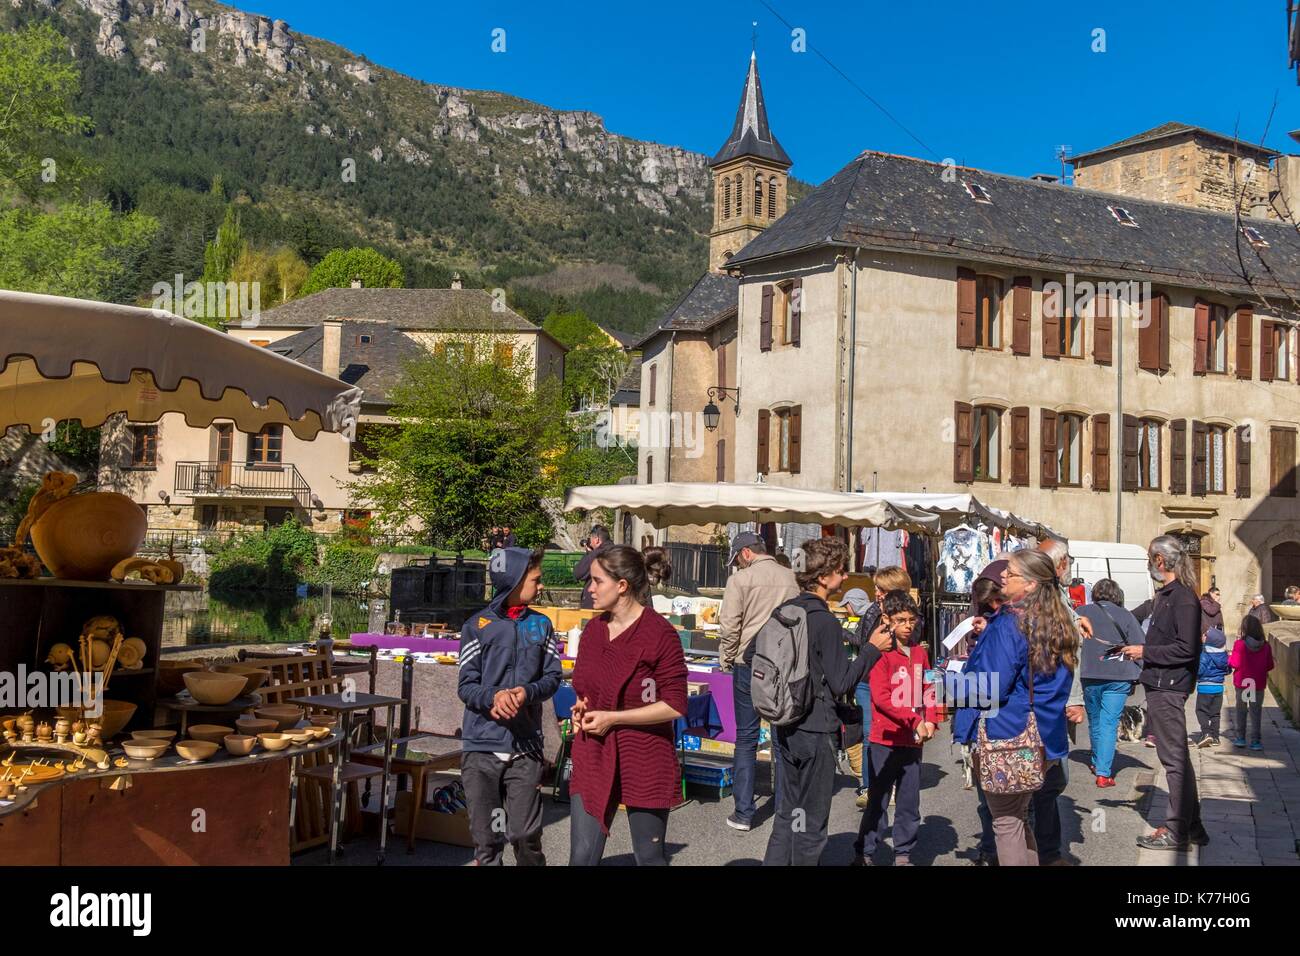 France, Lozere, the Causses and the Cevennes, Mediterranean agro pastoral cultural landscape, listed as World Heritage by UNESCO, Cevennes National Park (Parc National des Cevennes), listed as Biosphere Reserve by UNESCO, Florac market day Stock Photo